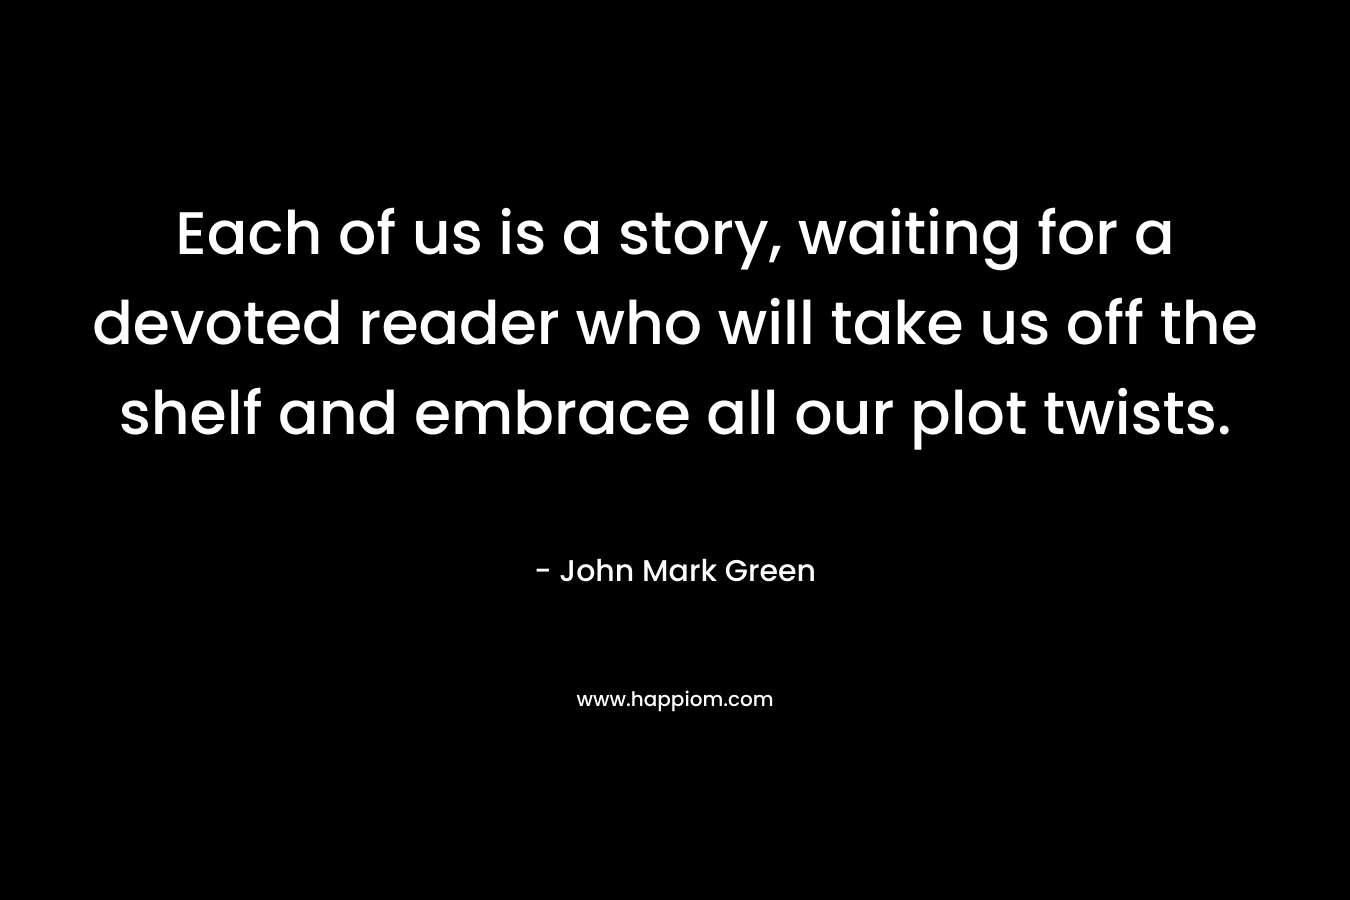 Each of us is a story, waiting for a devoted reader who will take us off the shelf and embrace all our plot twists. – John Mark Green